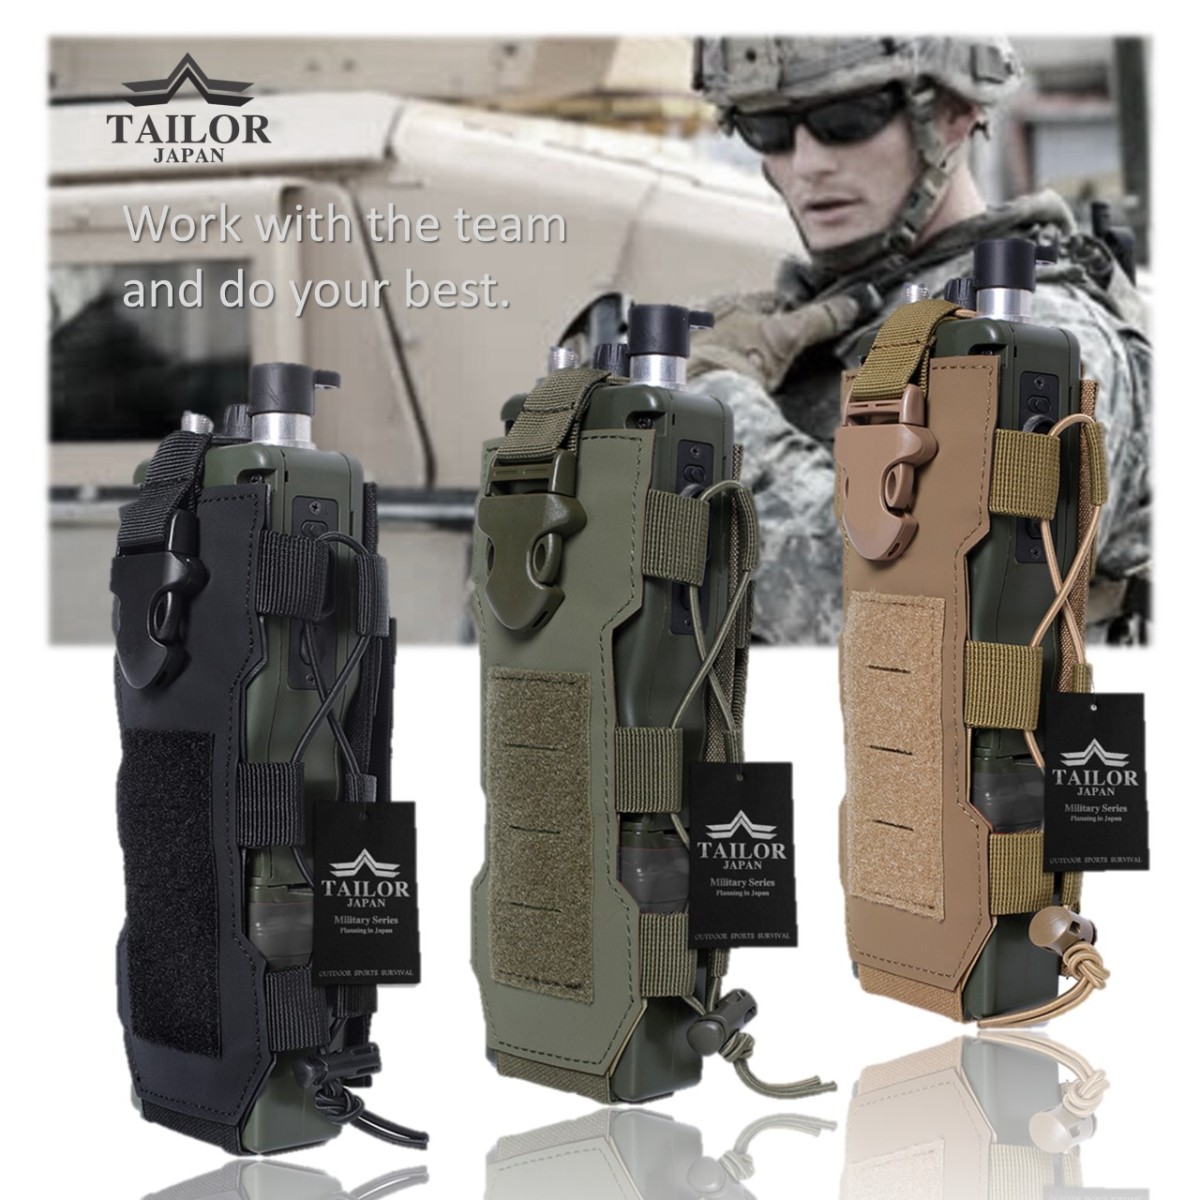 TAILOR JAPAN Taylor Japan airsoft radio pouch transceiver pouch transceiver case transceiver pouch wireless pouch airsoft pouch dummy transceiver 